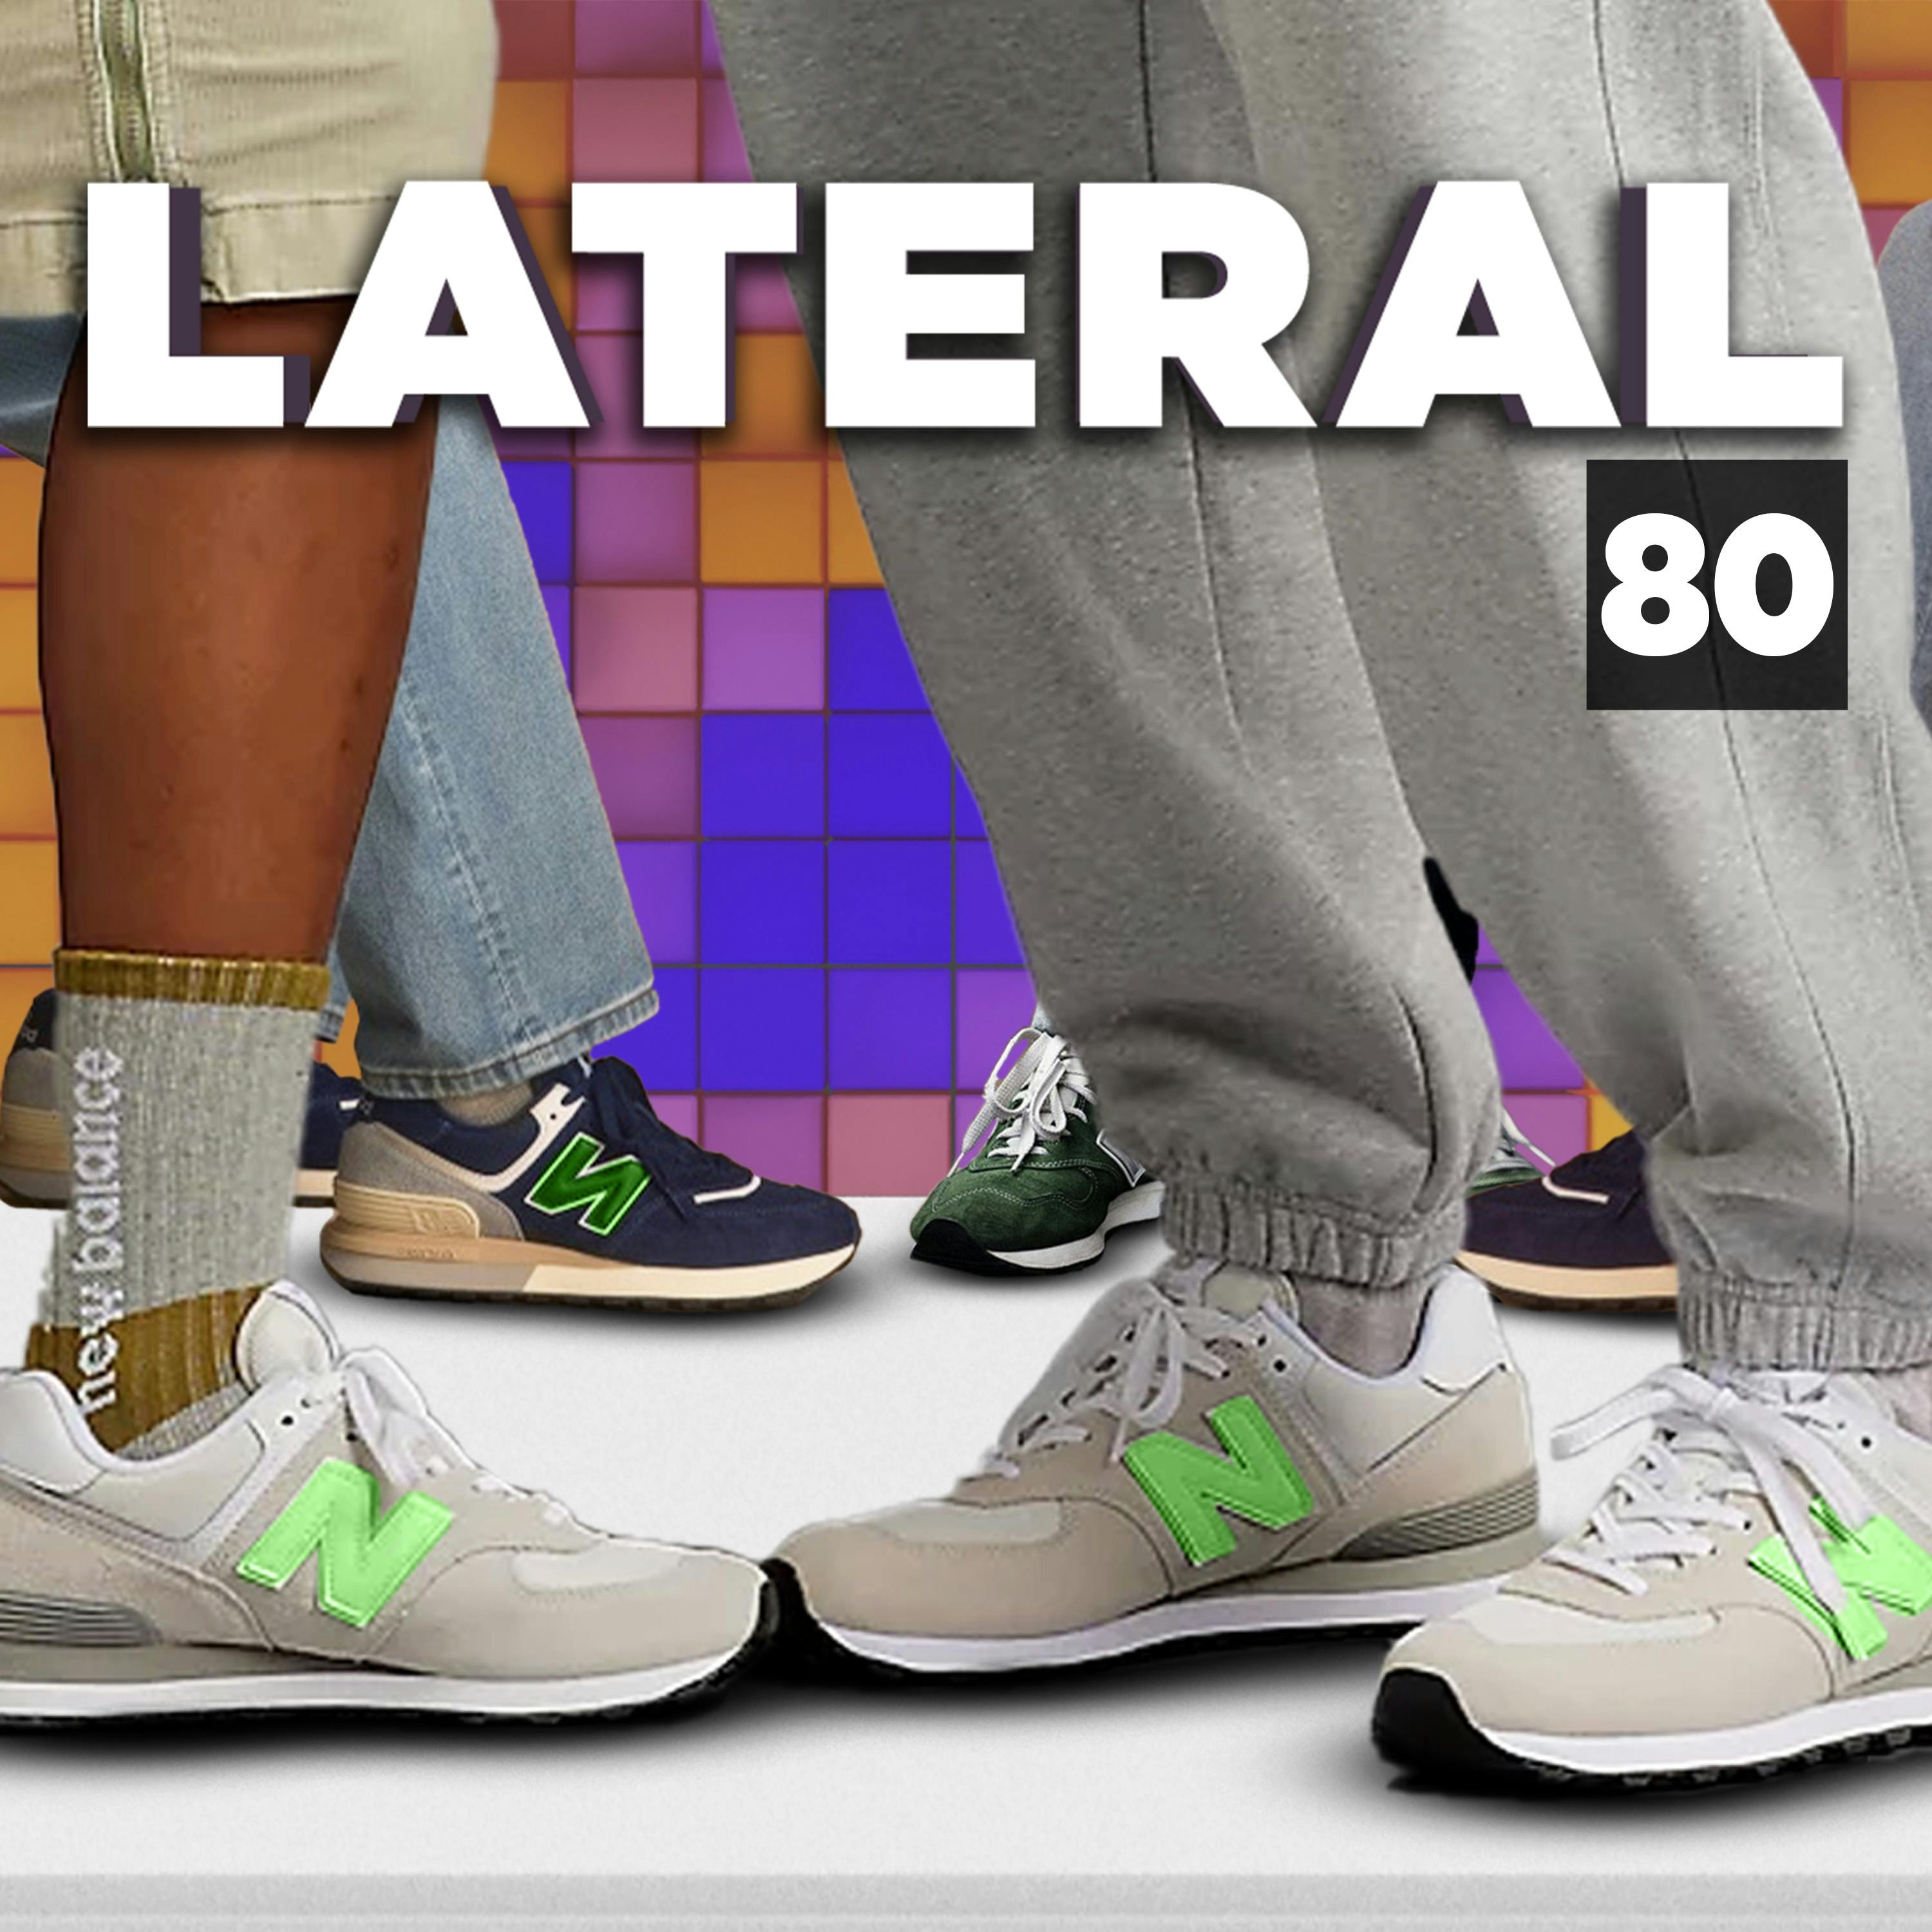 80: The identical trainers